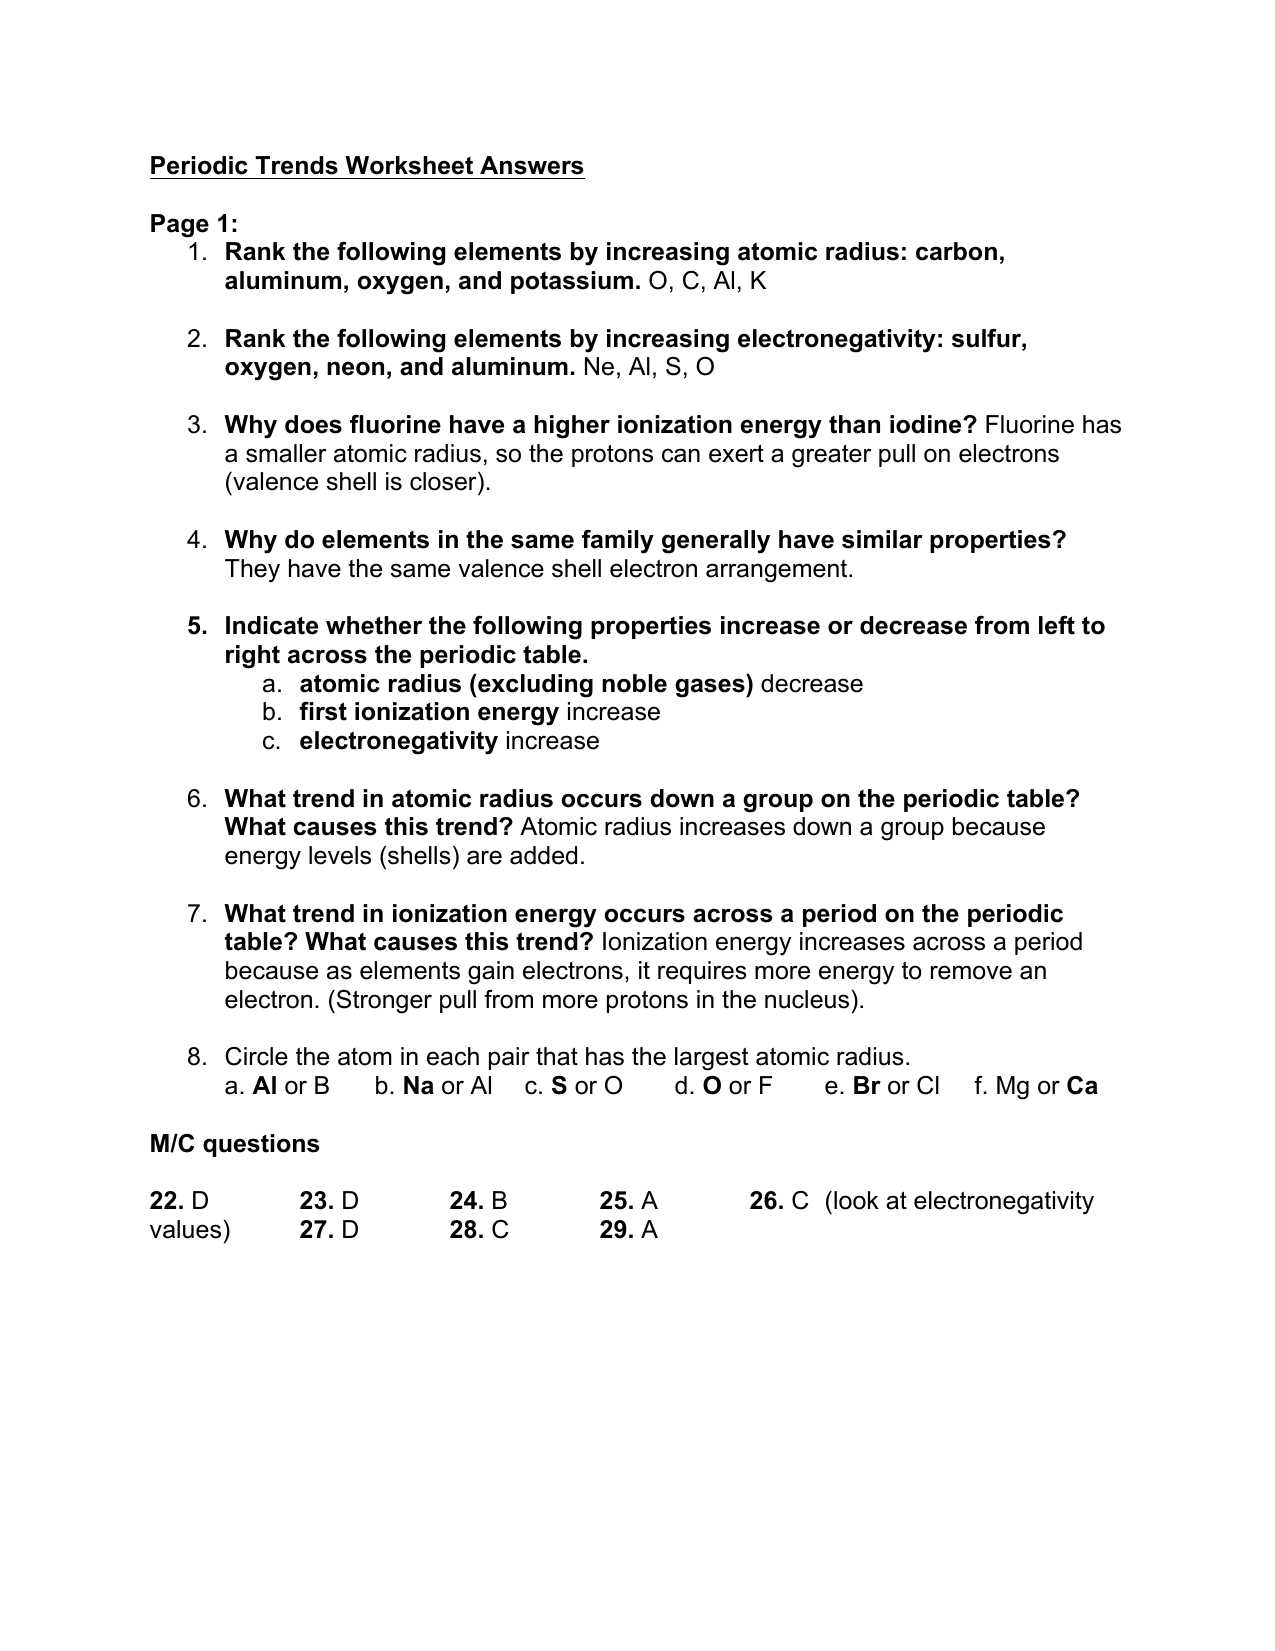 Limiting Reagent Worksheet as Well as Periodic Trends Worksheet Answers Page 1 Rank the Following